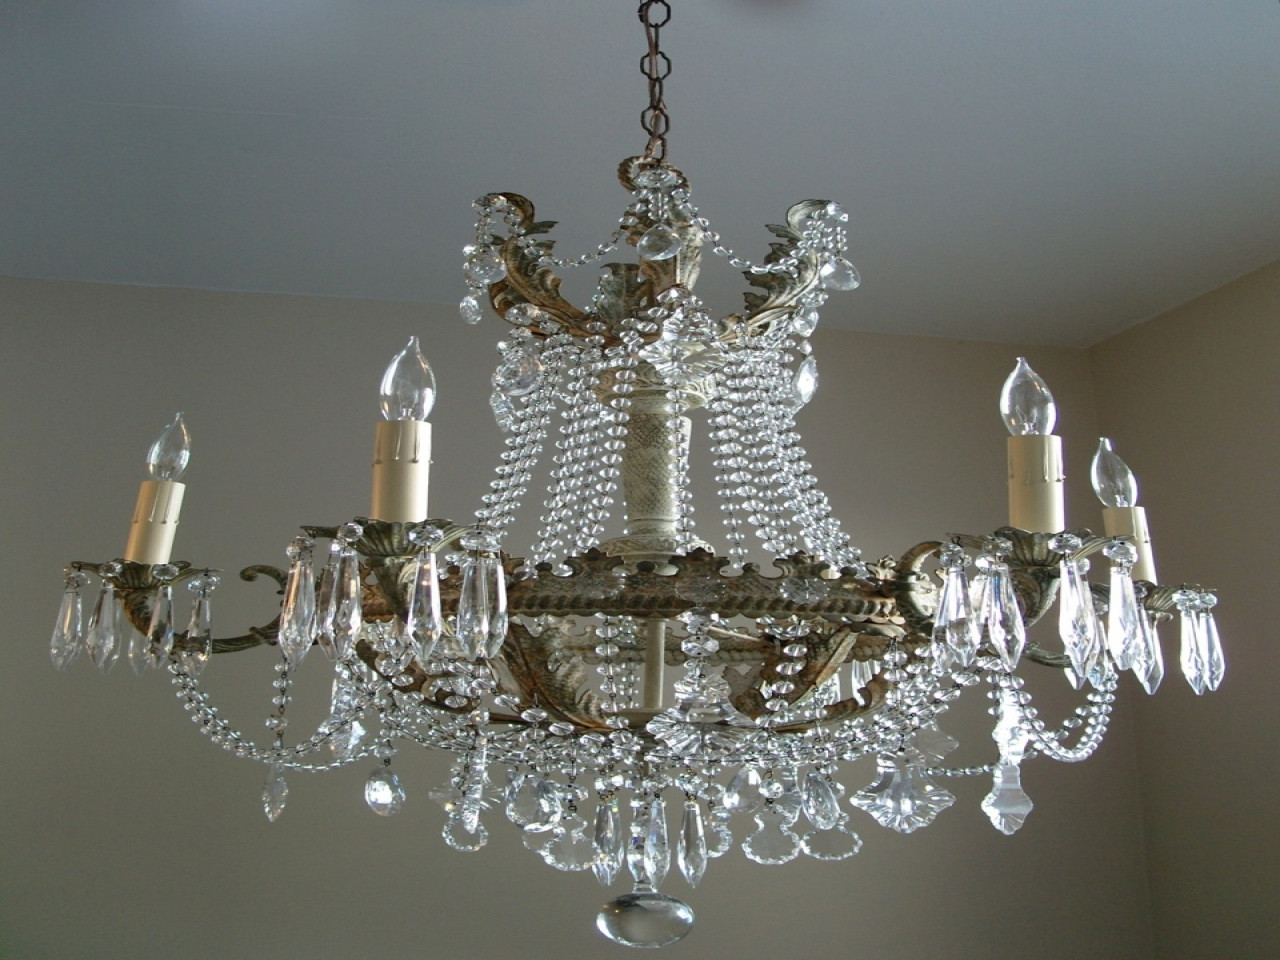 Best ideas about Shabby Chic Chandelier
. Save or Pin Shabby Chic Empire Chandelier Marjorie Stafford Design Now.